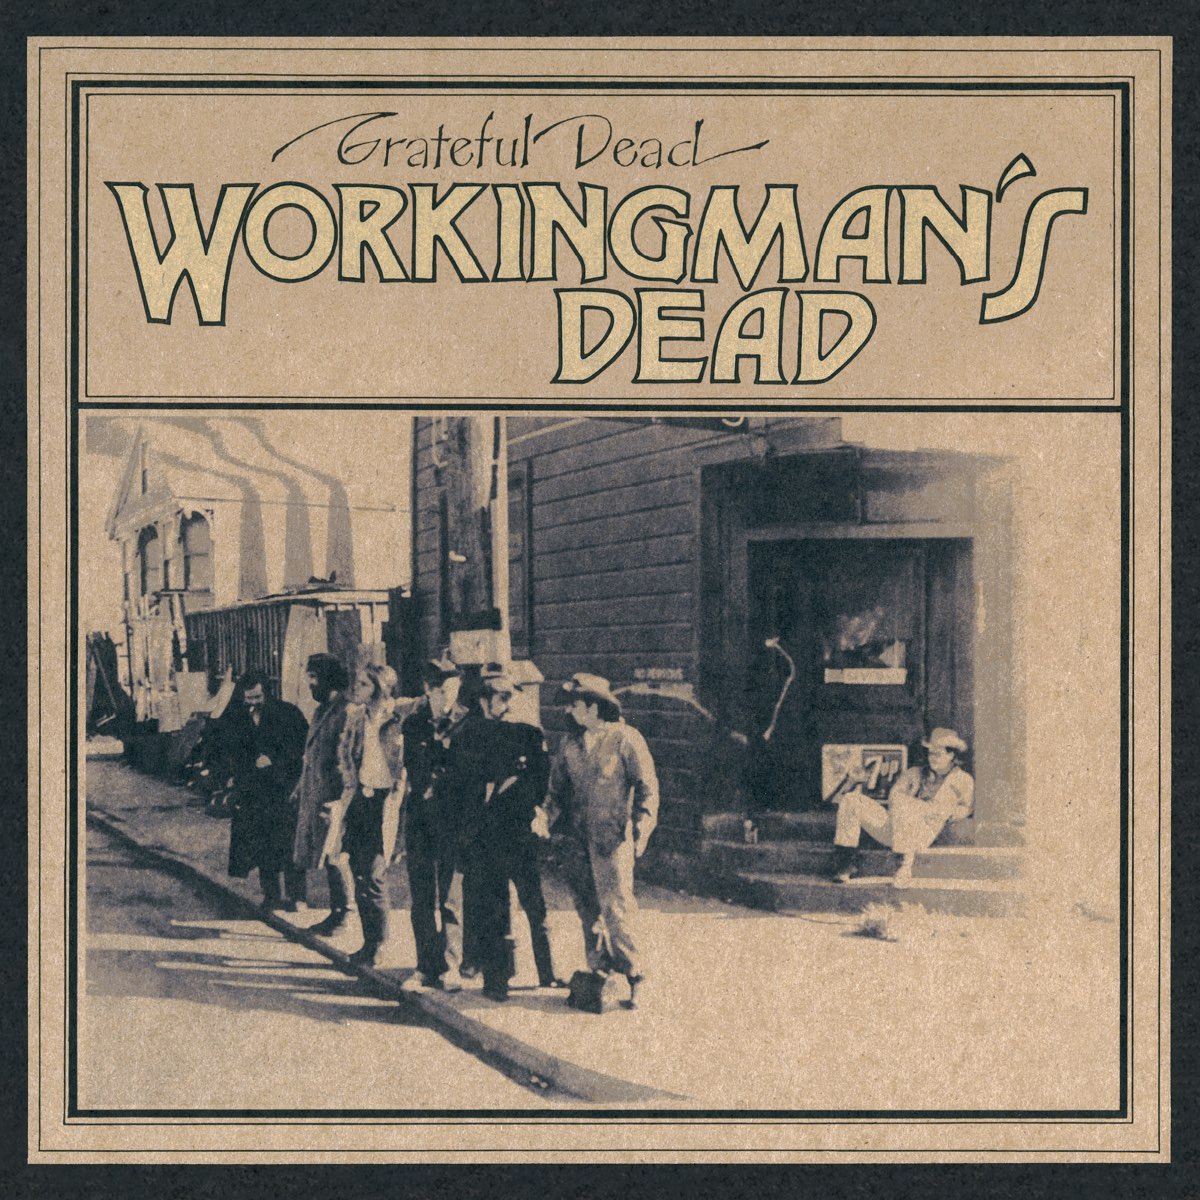 ‎Workingman's Dead (50th Anniversary Deluxe Edition) by Grateful Dead